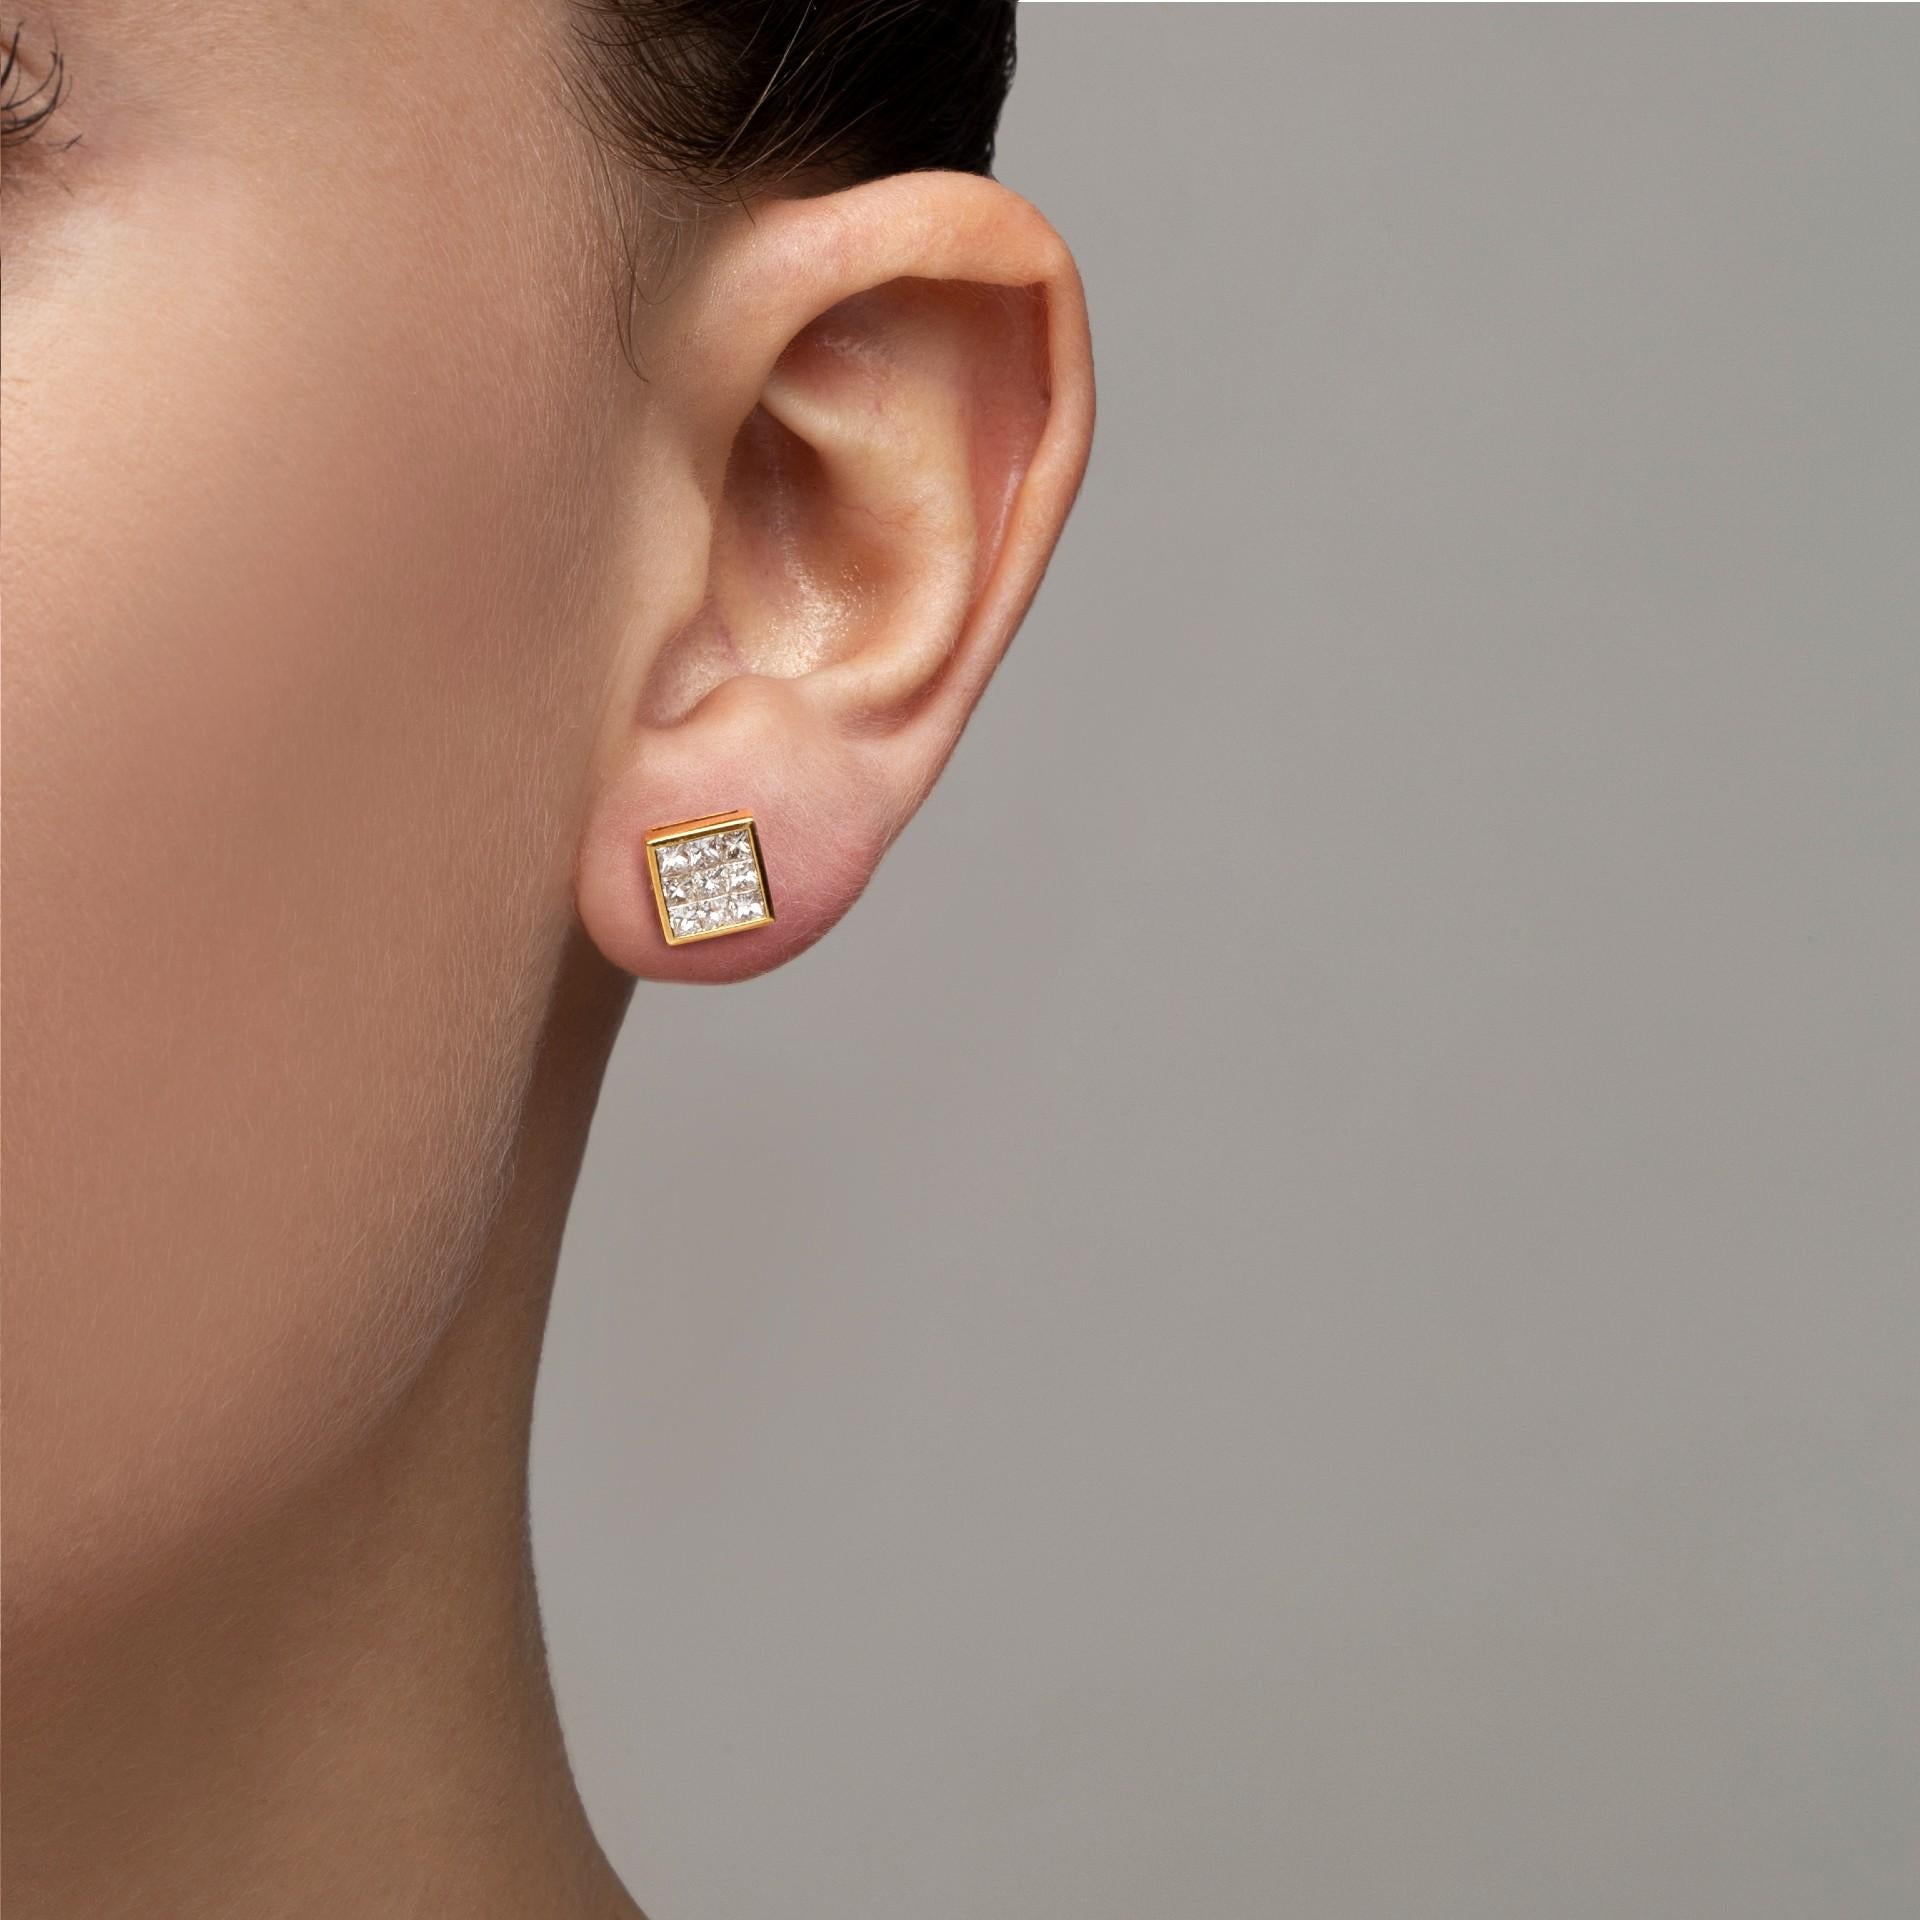 Jona design collection, hand crafted in Italy, 18 karat yellow gold, square stud earrings, featuring 18 princess-cut white diamonds, F color, VVS2 clarity, for a total weight of 1,78 carats set with an invisible setting.
Dimensions : L 0.35 in x W